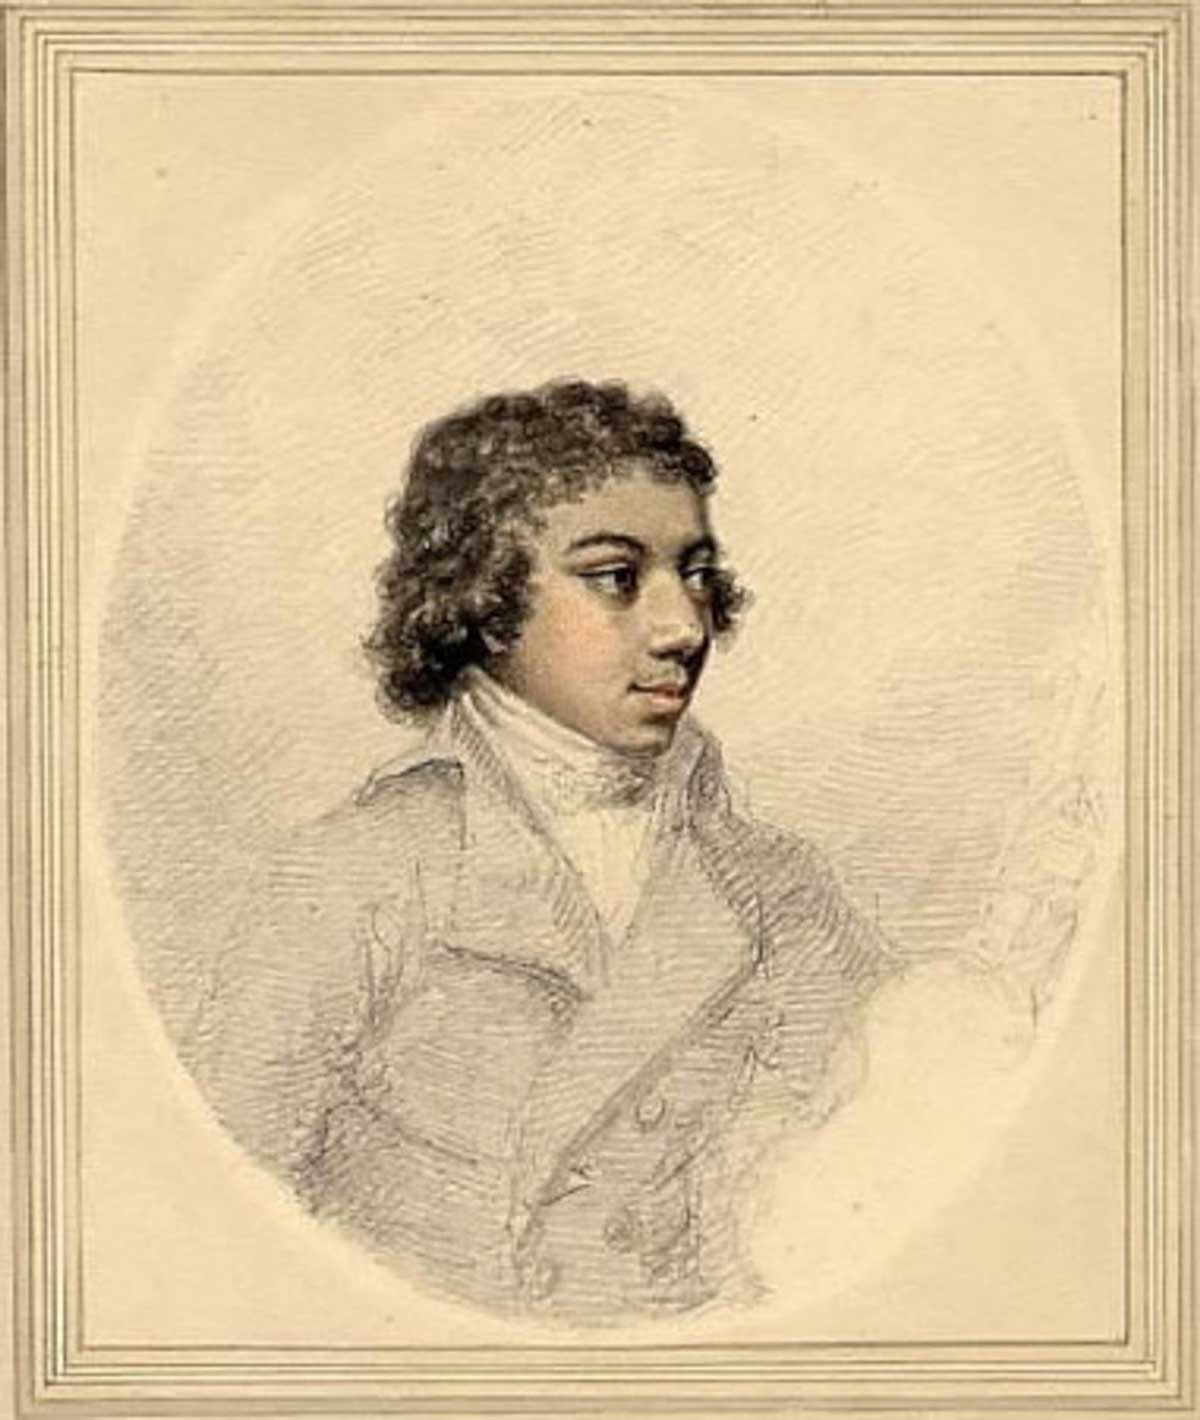 This pencil and watercolour portrait shows a young Bridgetower looking to the left, with three quarters of his face shown. © The Trustees of the British Museum / CC BY-NC-SA 4.0